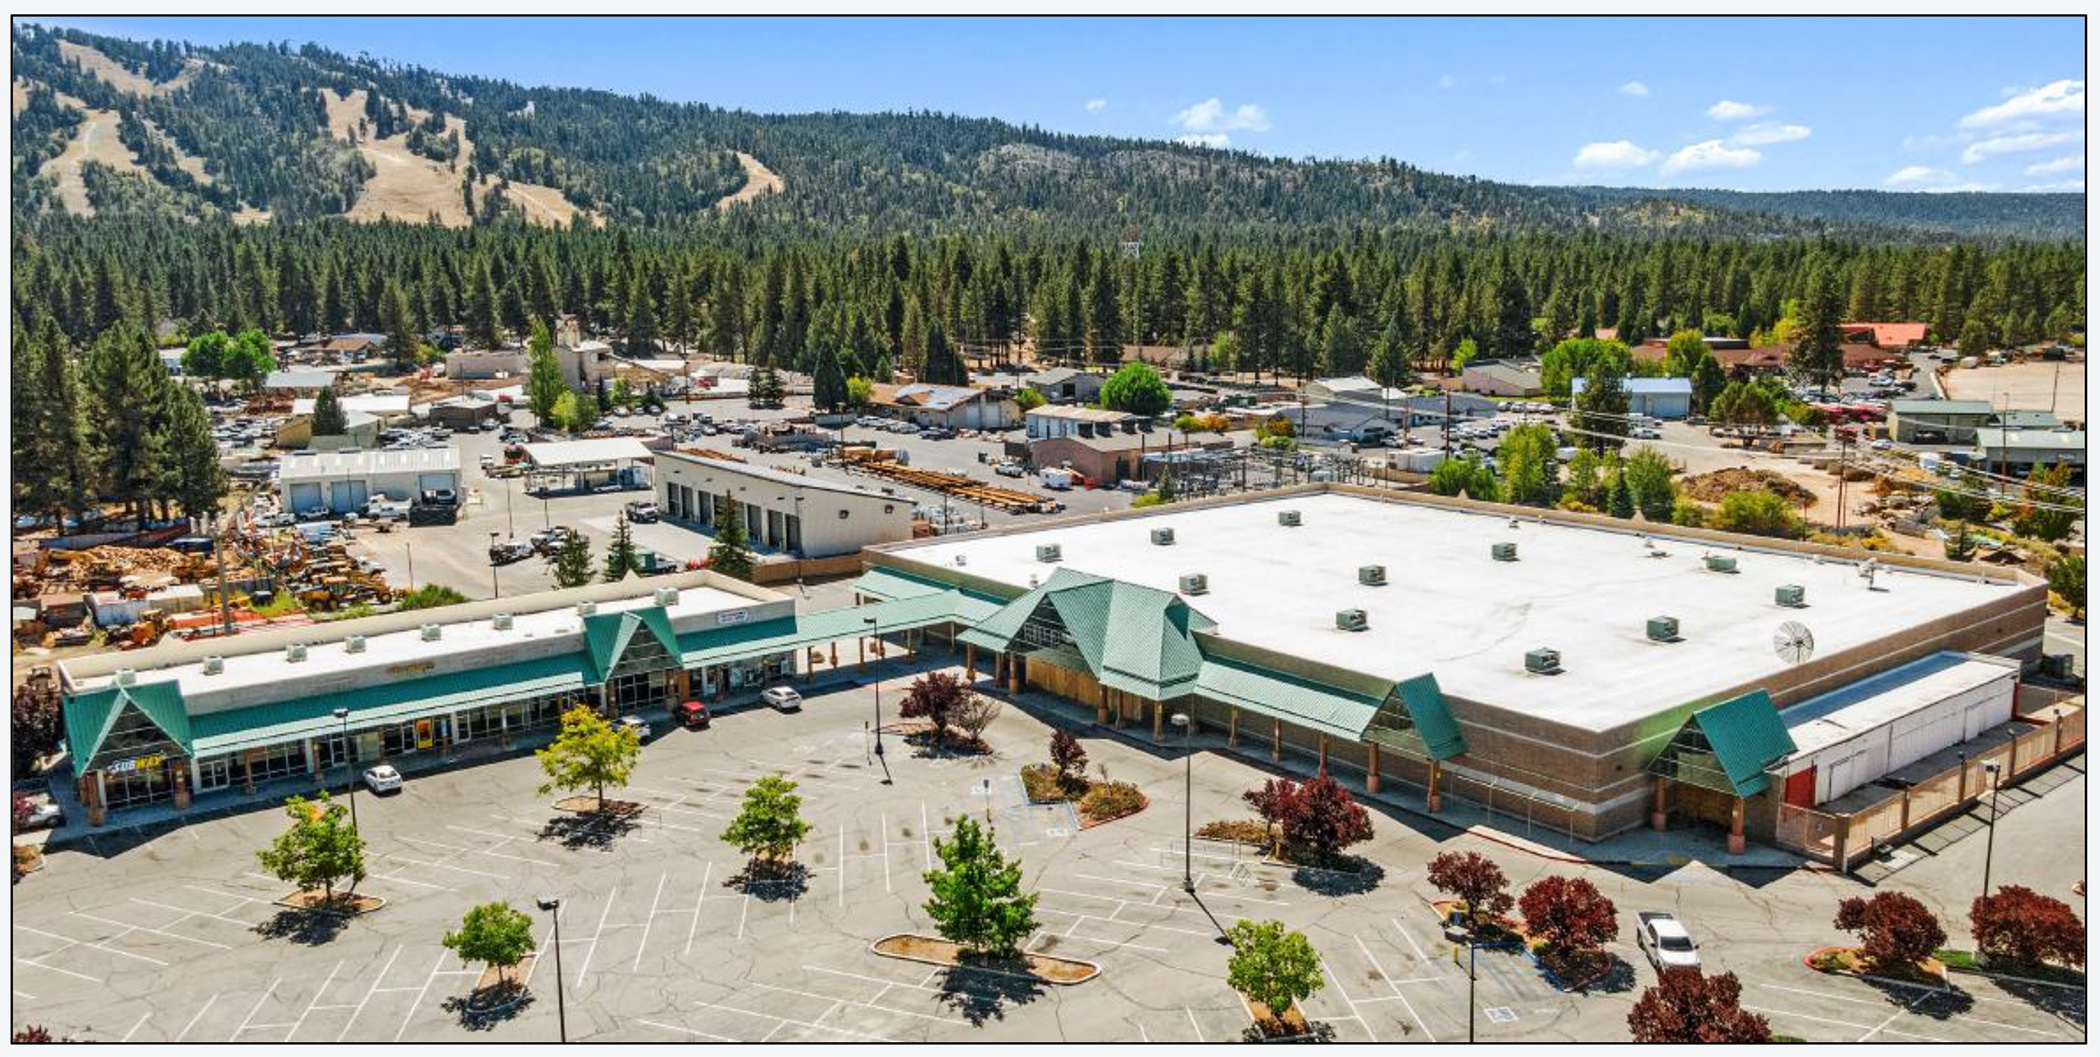 Wood Investments Companies Purchases Former Kmart Property to Develop 80,800 SF Grocery-Anchored Shopping Center in Big Bear Lake, Calif. 